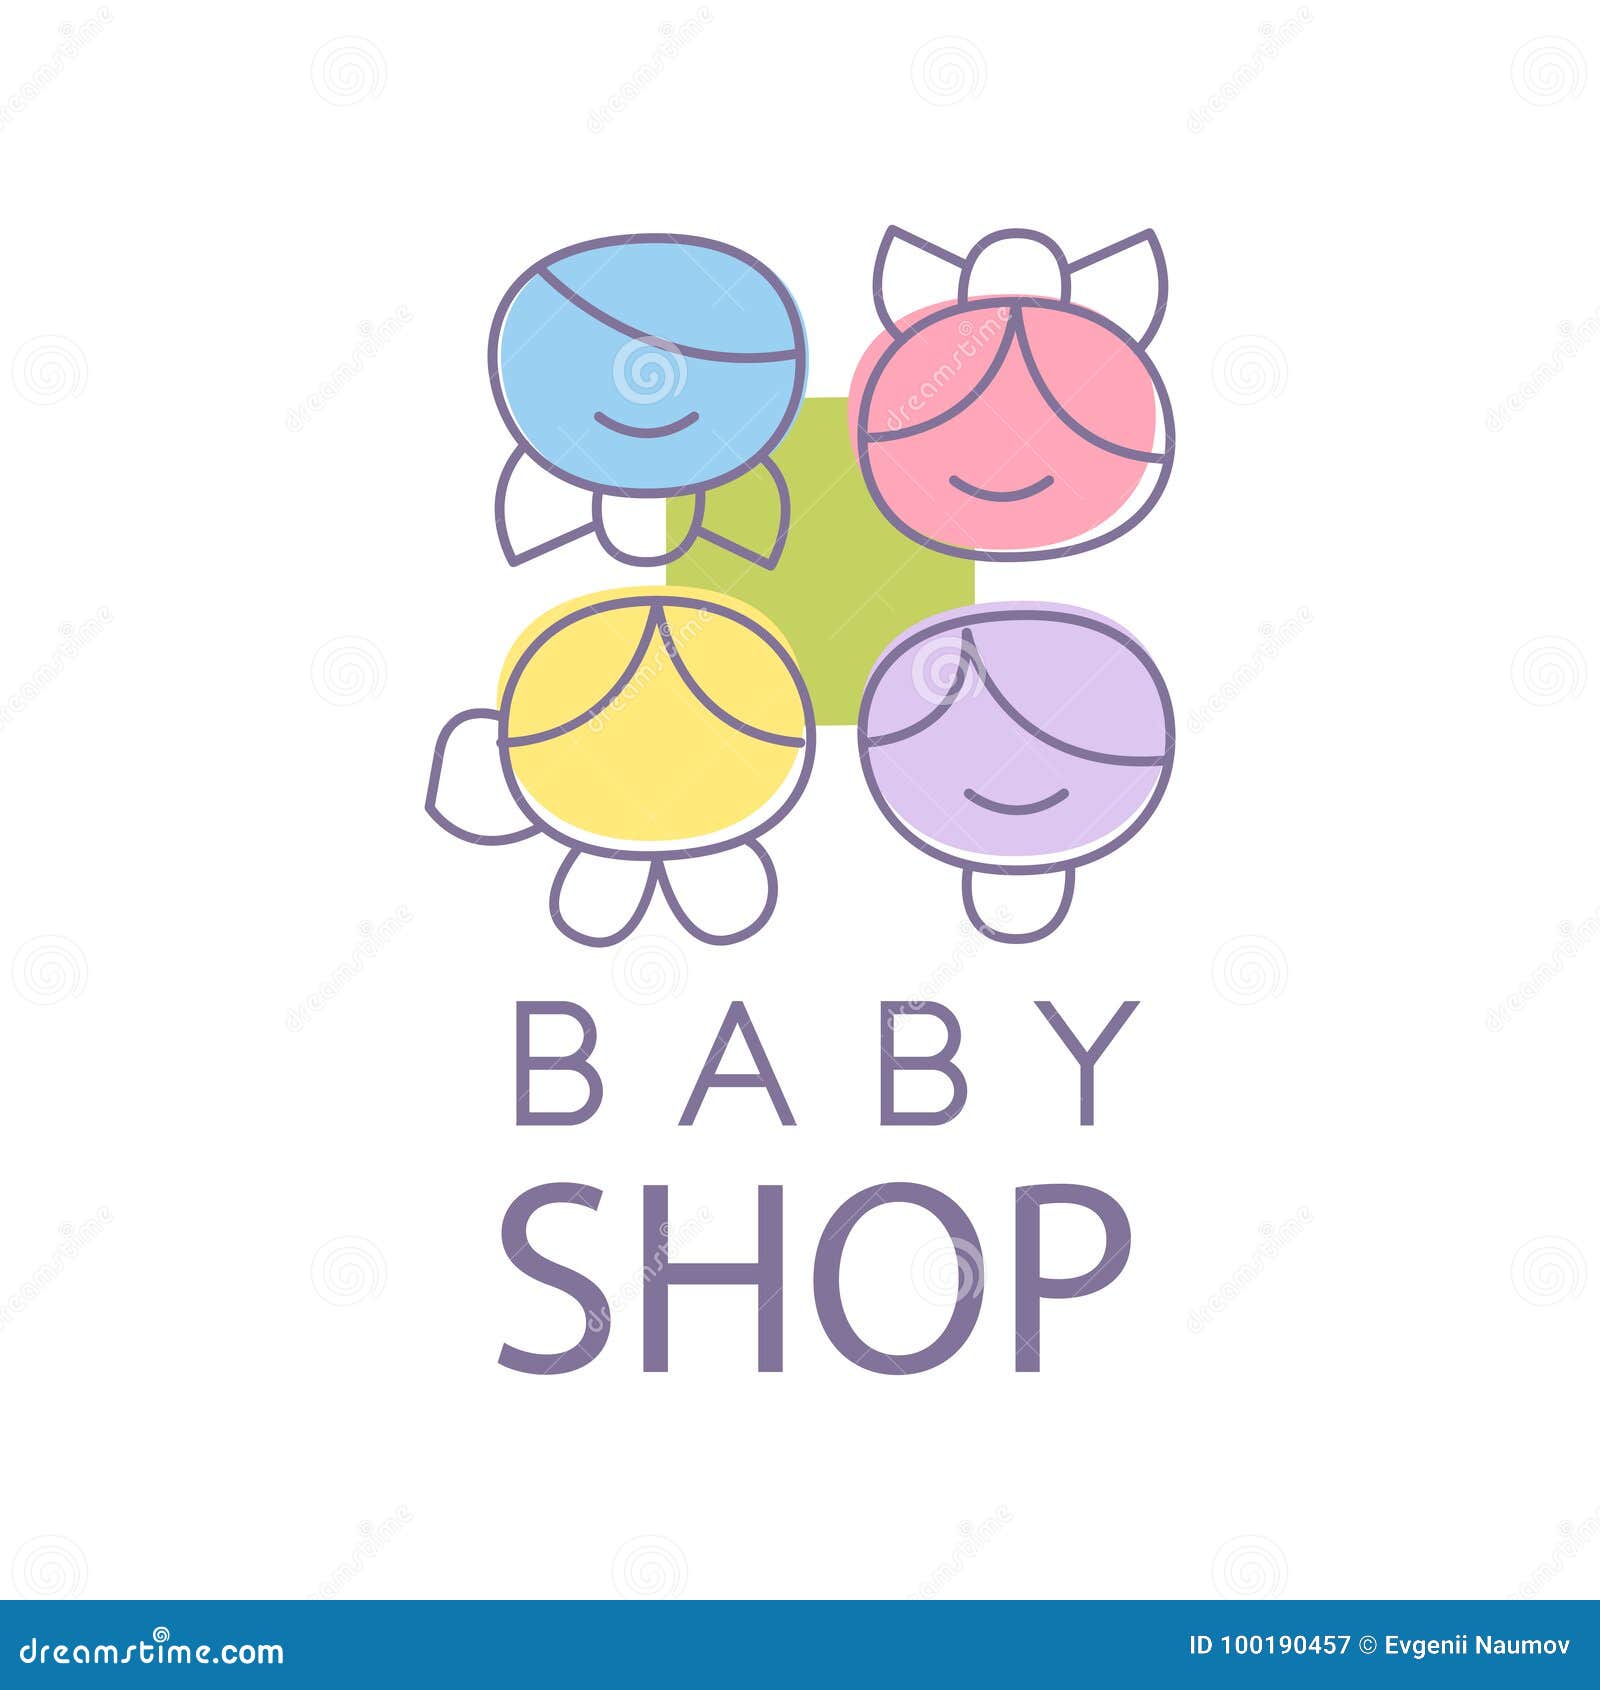 Baby Shop Logo Design, Emblem with Kid Faces, Label for Baby Products ...